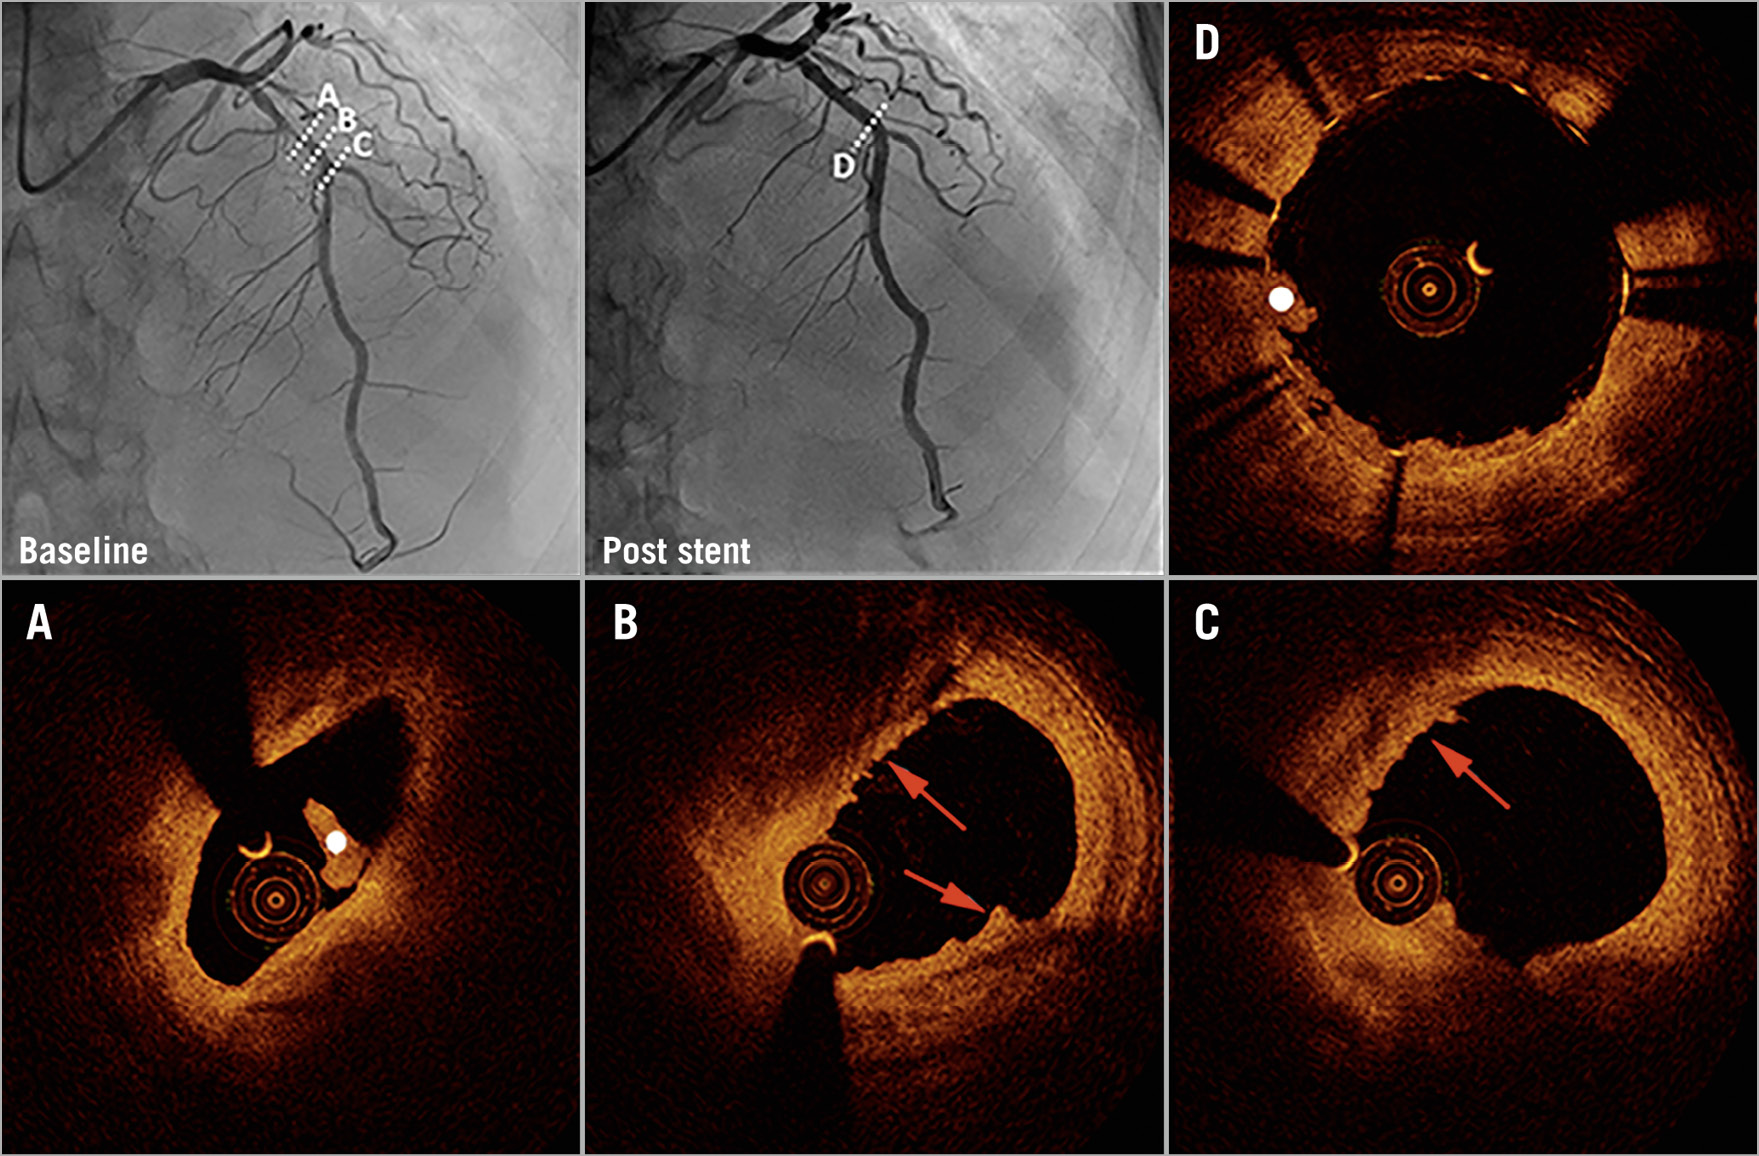 Figure 2. Coronary angiography and optical coherence tomography in early spontaneous reperfusion. Baseline angiography (upper left) shows a patient with TIMI 3 flow. Optical coherence tomography (OCT) shows plaque erosion (red arrows) and white thrombus (white dot) (A-C). Coronary angiography (upper middle) and OCT show imaging of the region after stent implantation (D).